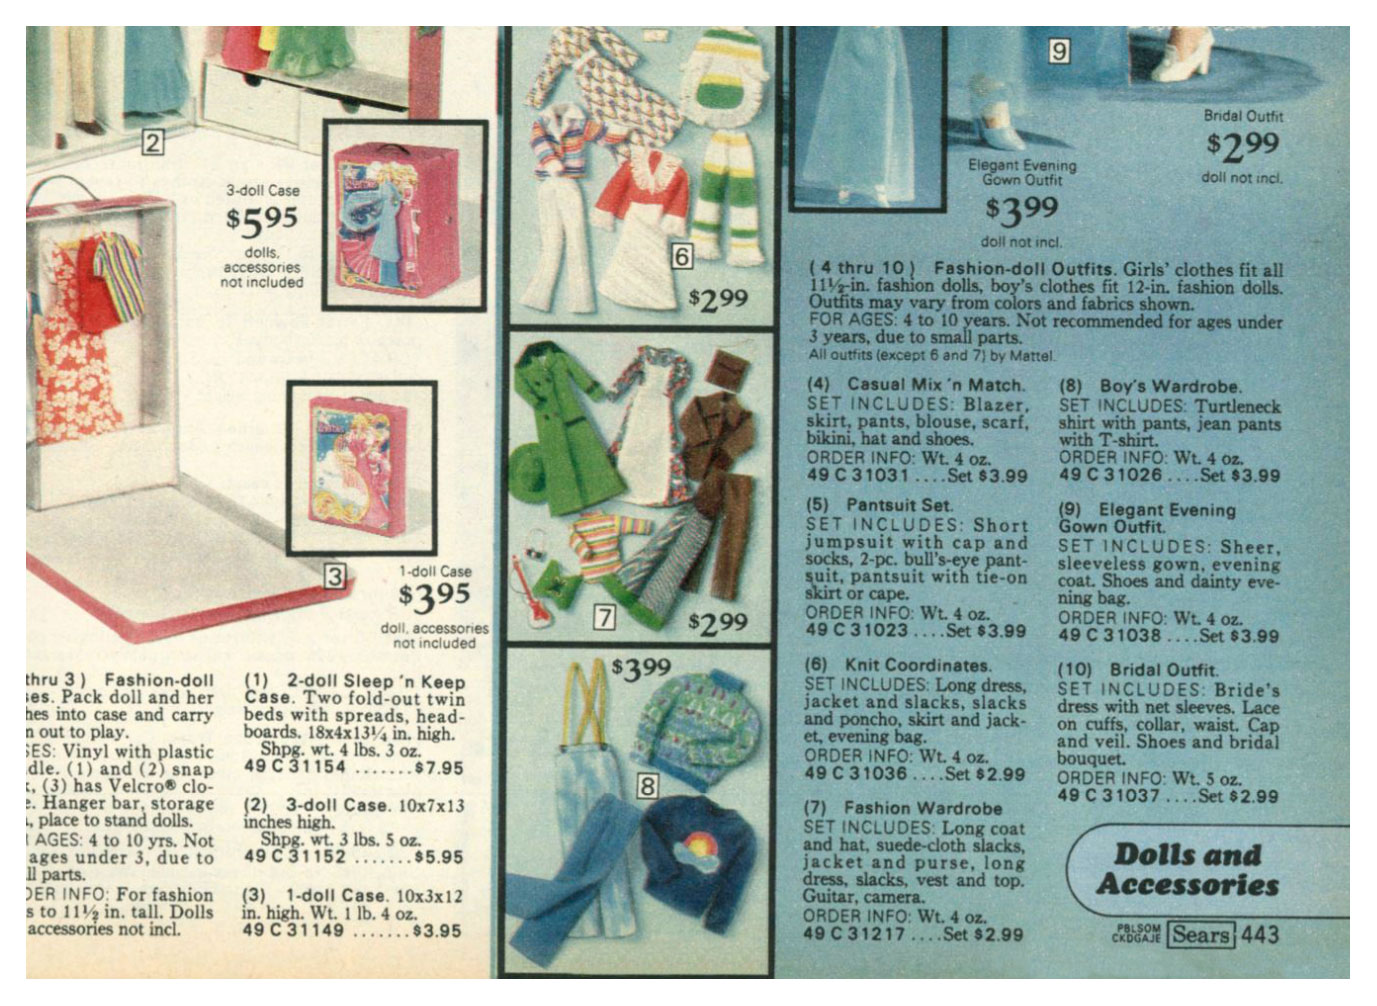 From 1977 Sears Wish Book